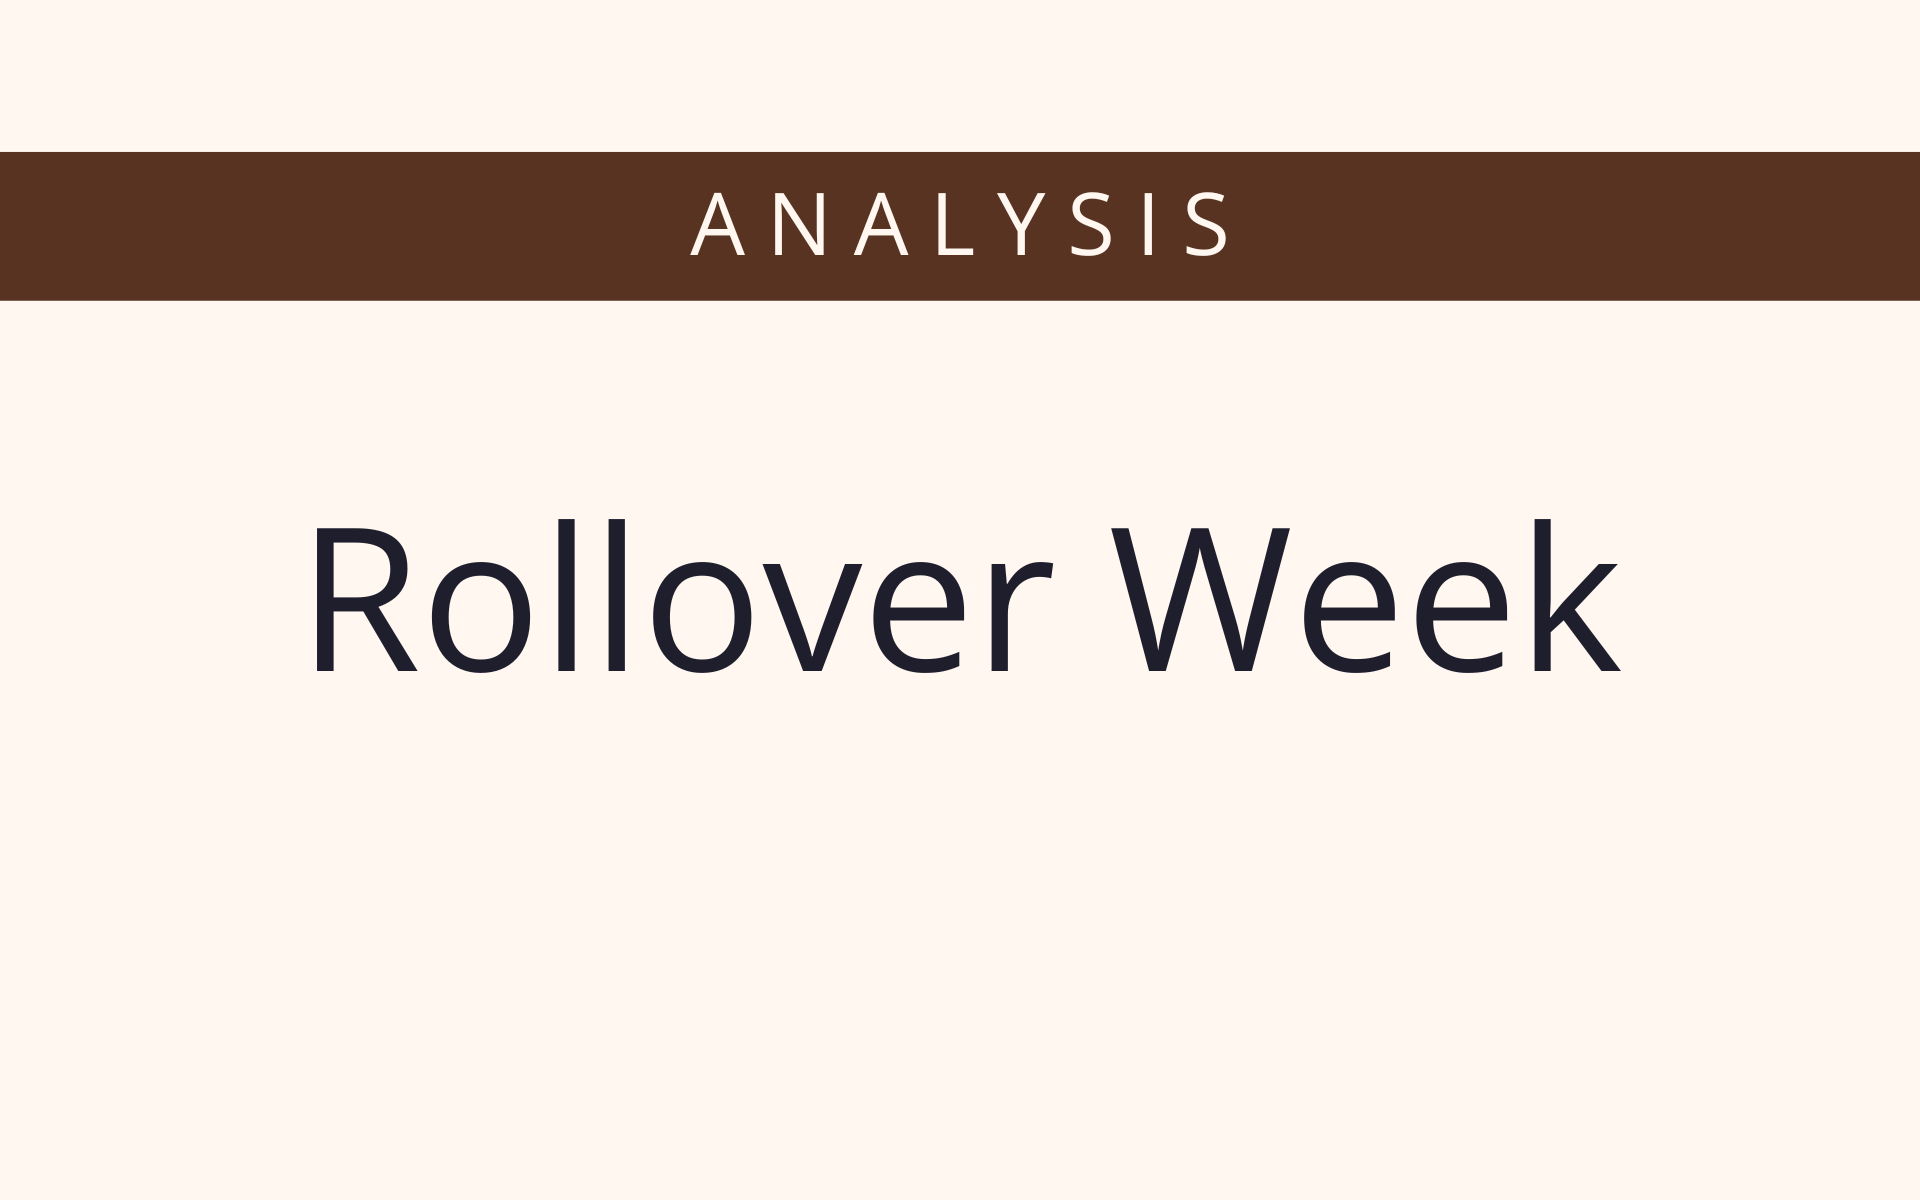 Do stocks really fall in rollover week?